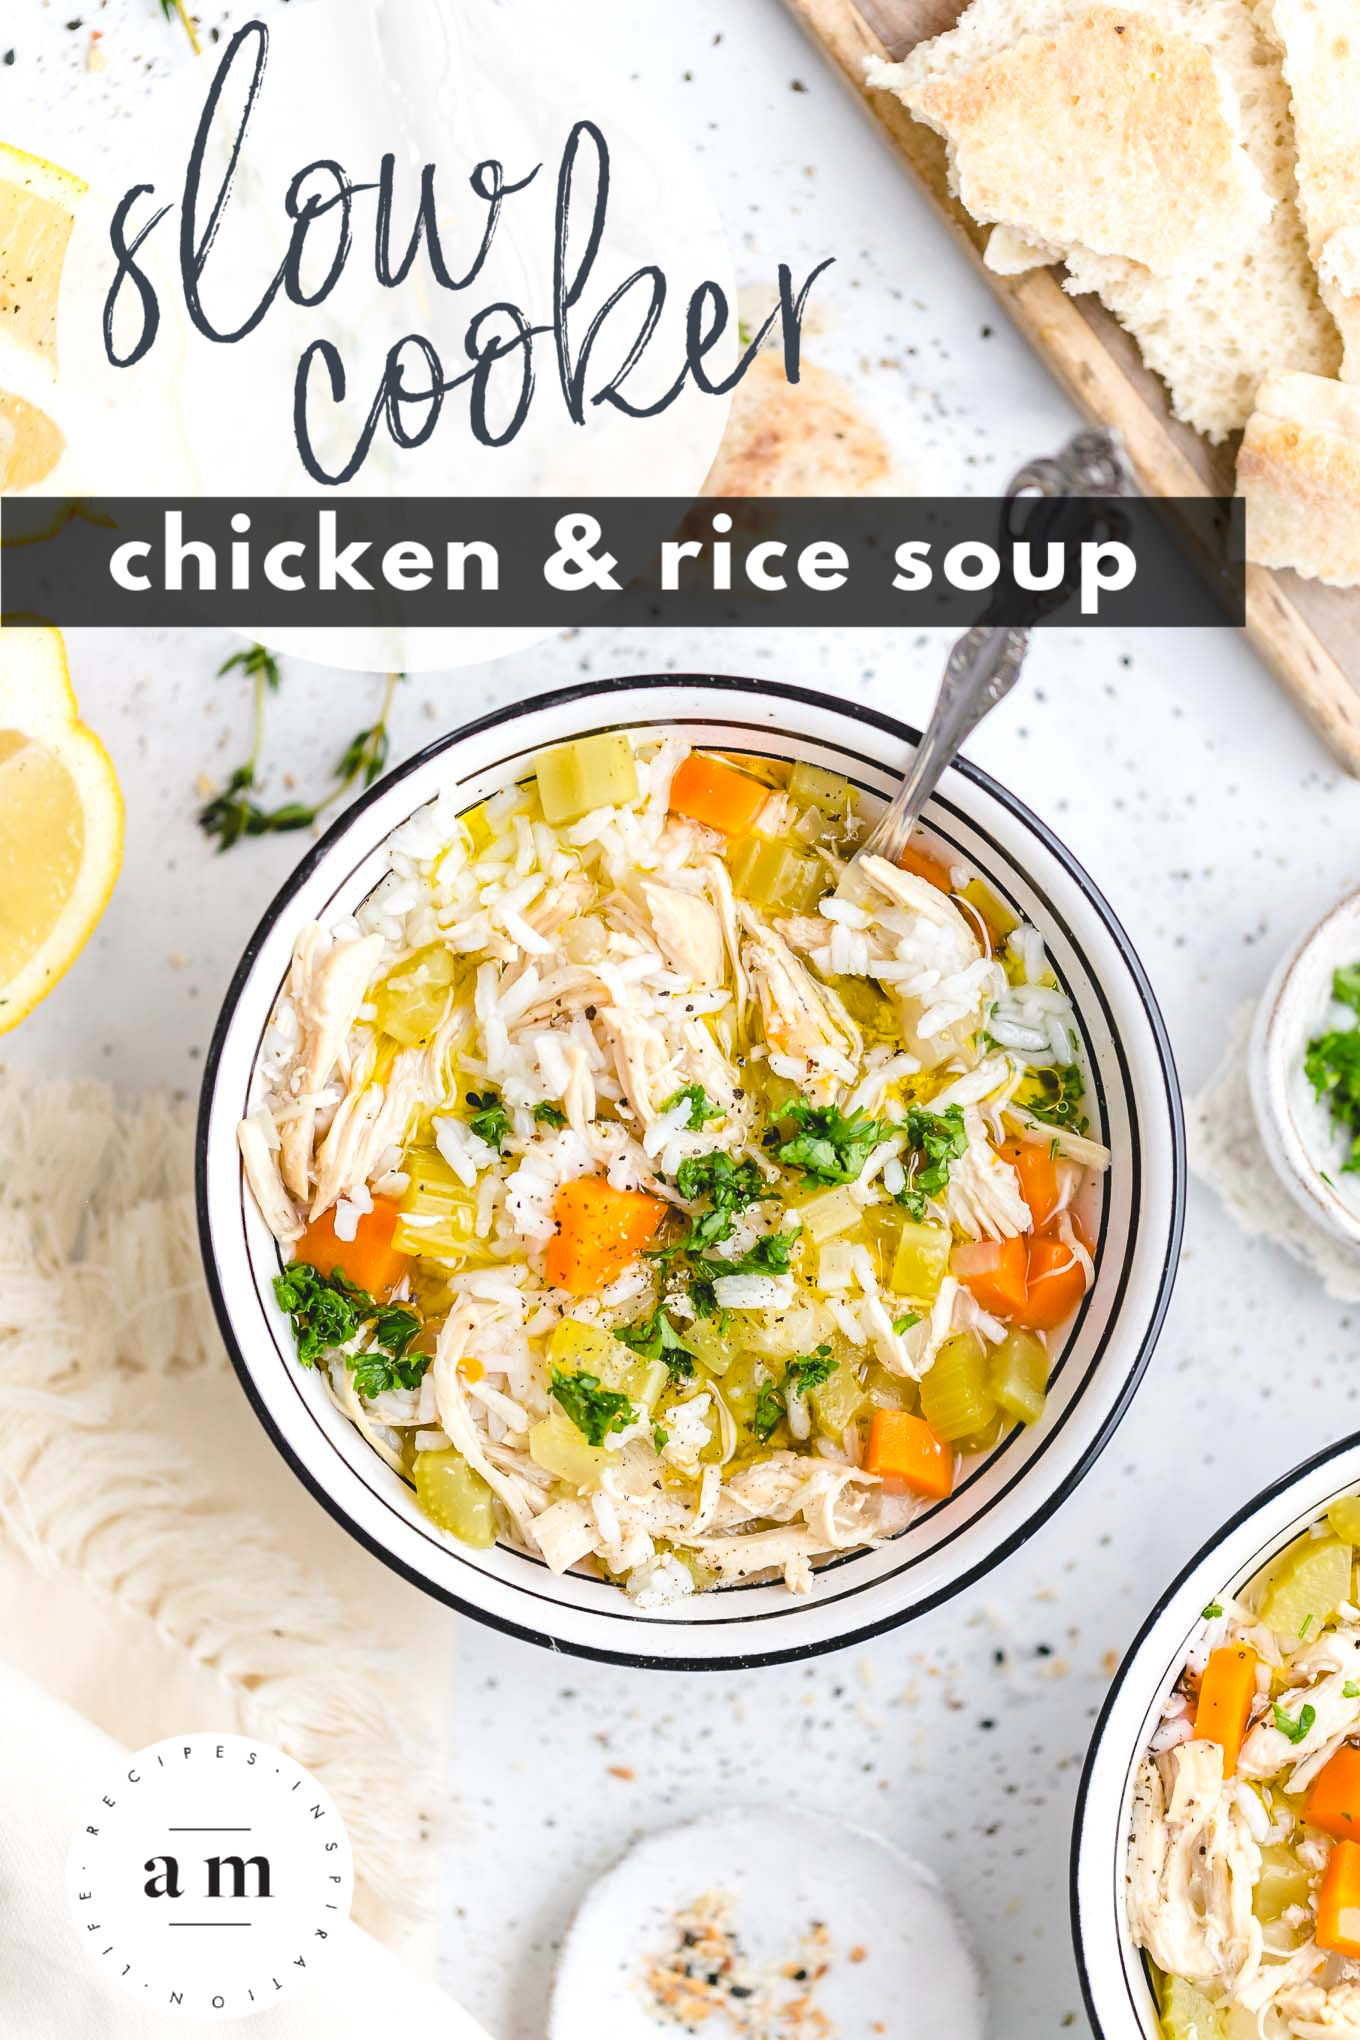 Slow Cooker Chicken and Rice Soup (219 calories) - a healthy, flavorful, and easy crockpot recipe made with boneless skinless chicken breasts, onion, carrots, celery, garlic, fresh thyme, bay leaves, chicken broth, and instant white rice (for extra convenience).